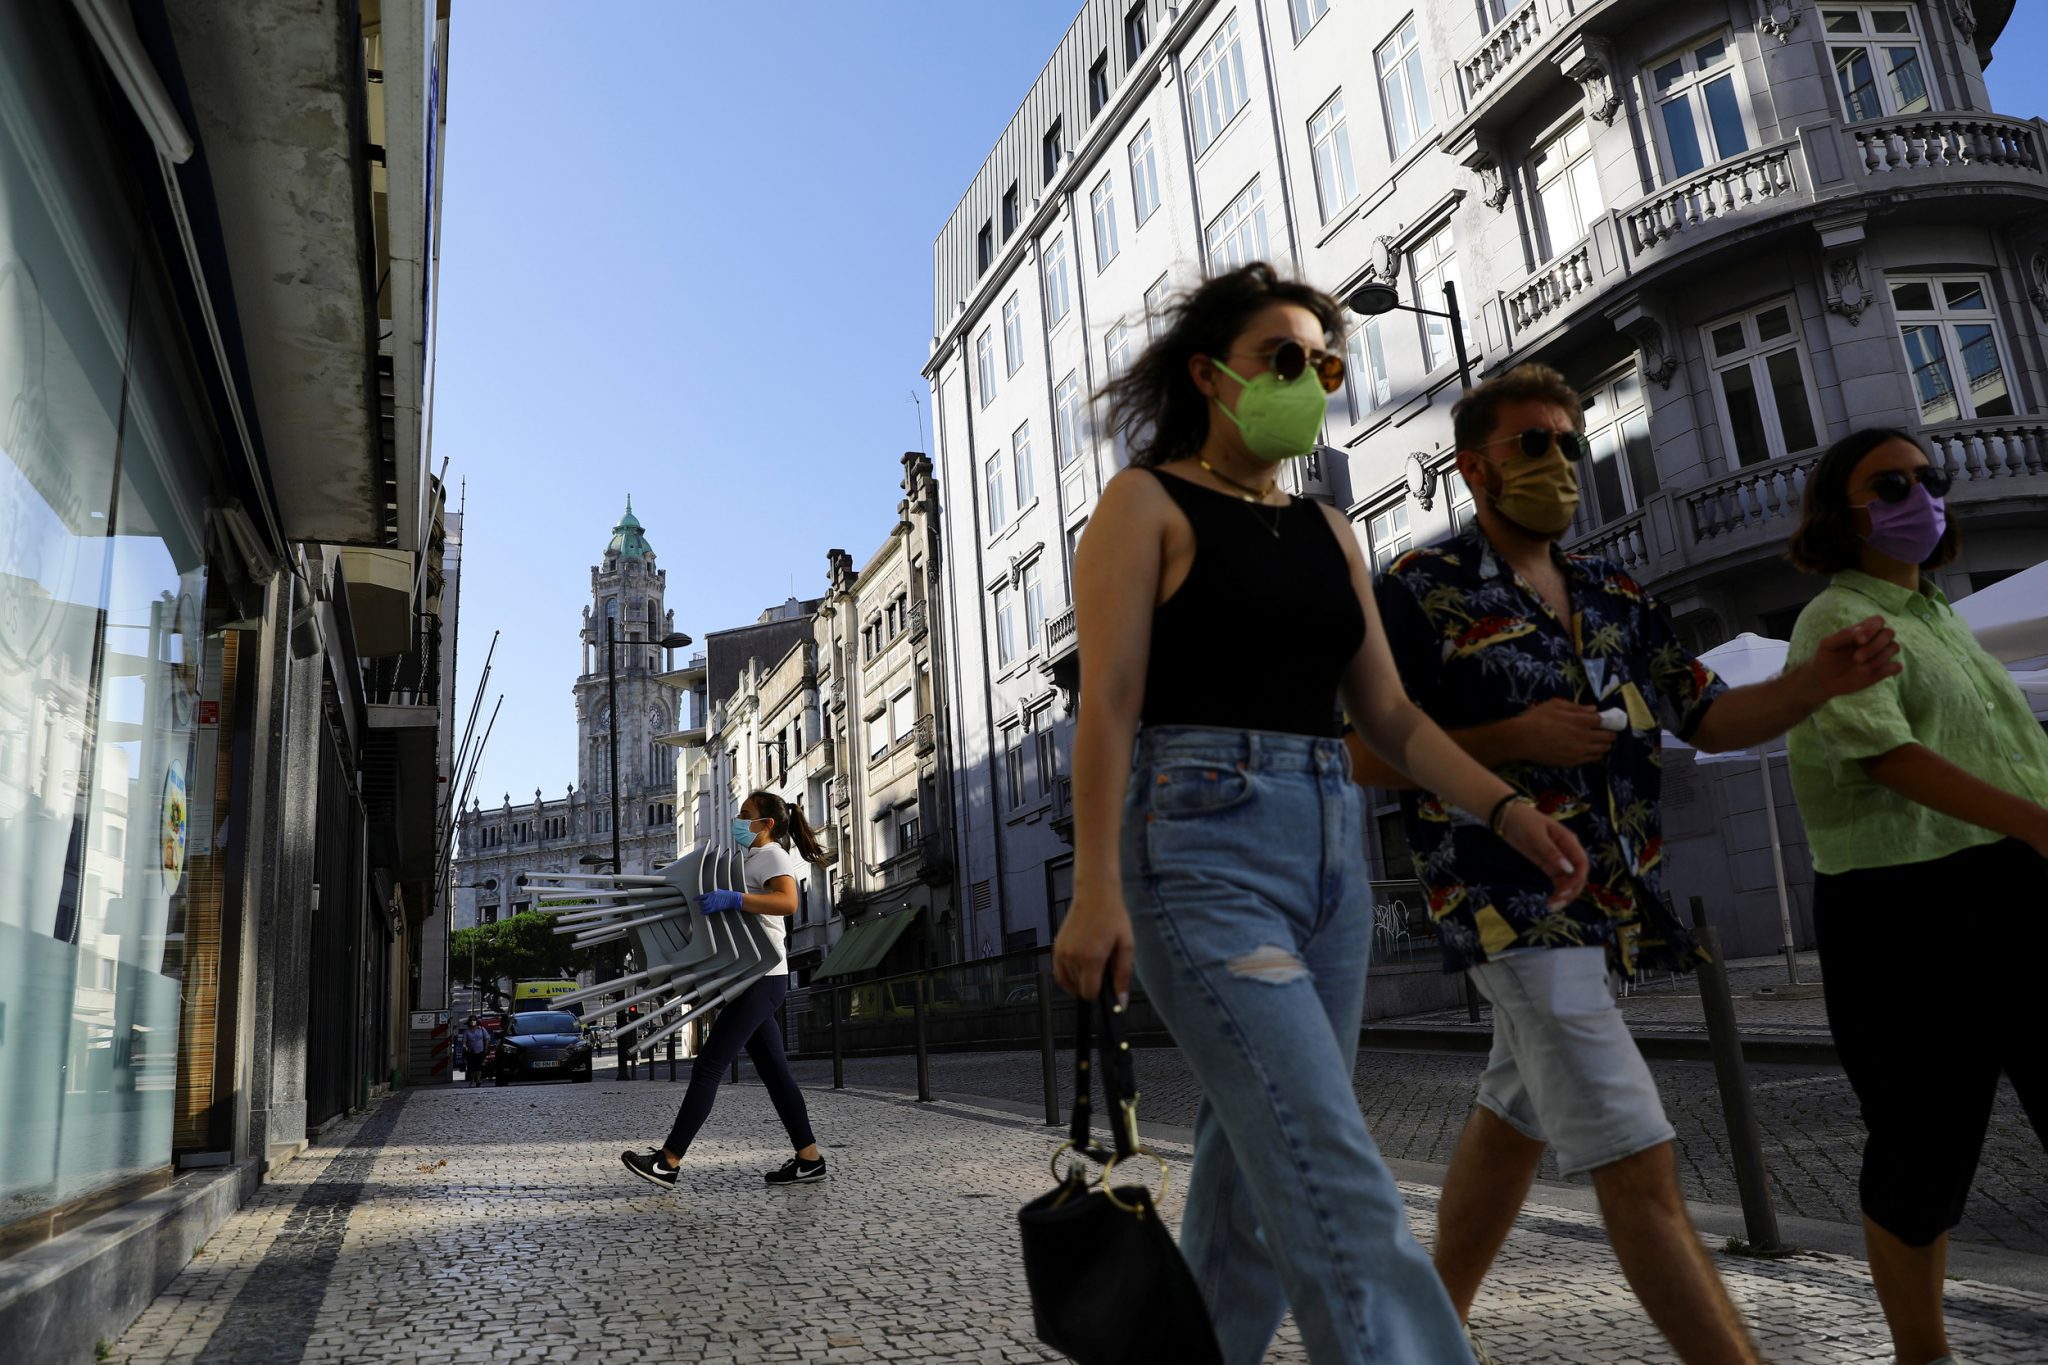 Portugal will lift a curfew, while restrictions on the opening hours of restaurants and shops will also be lifted.